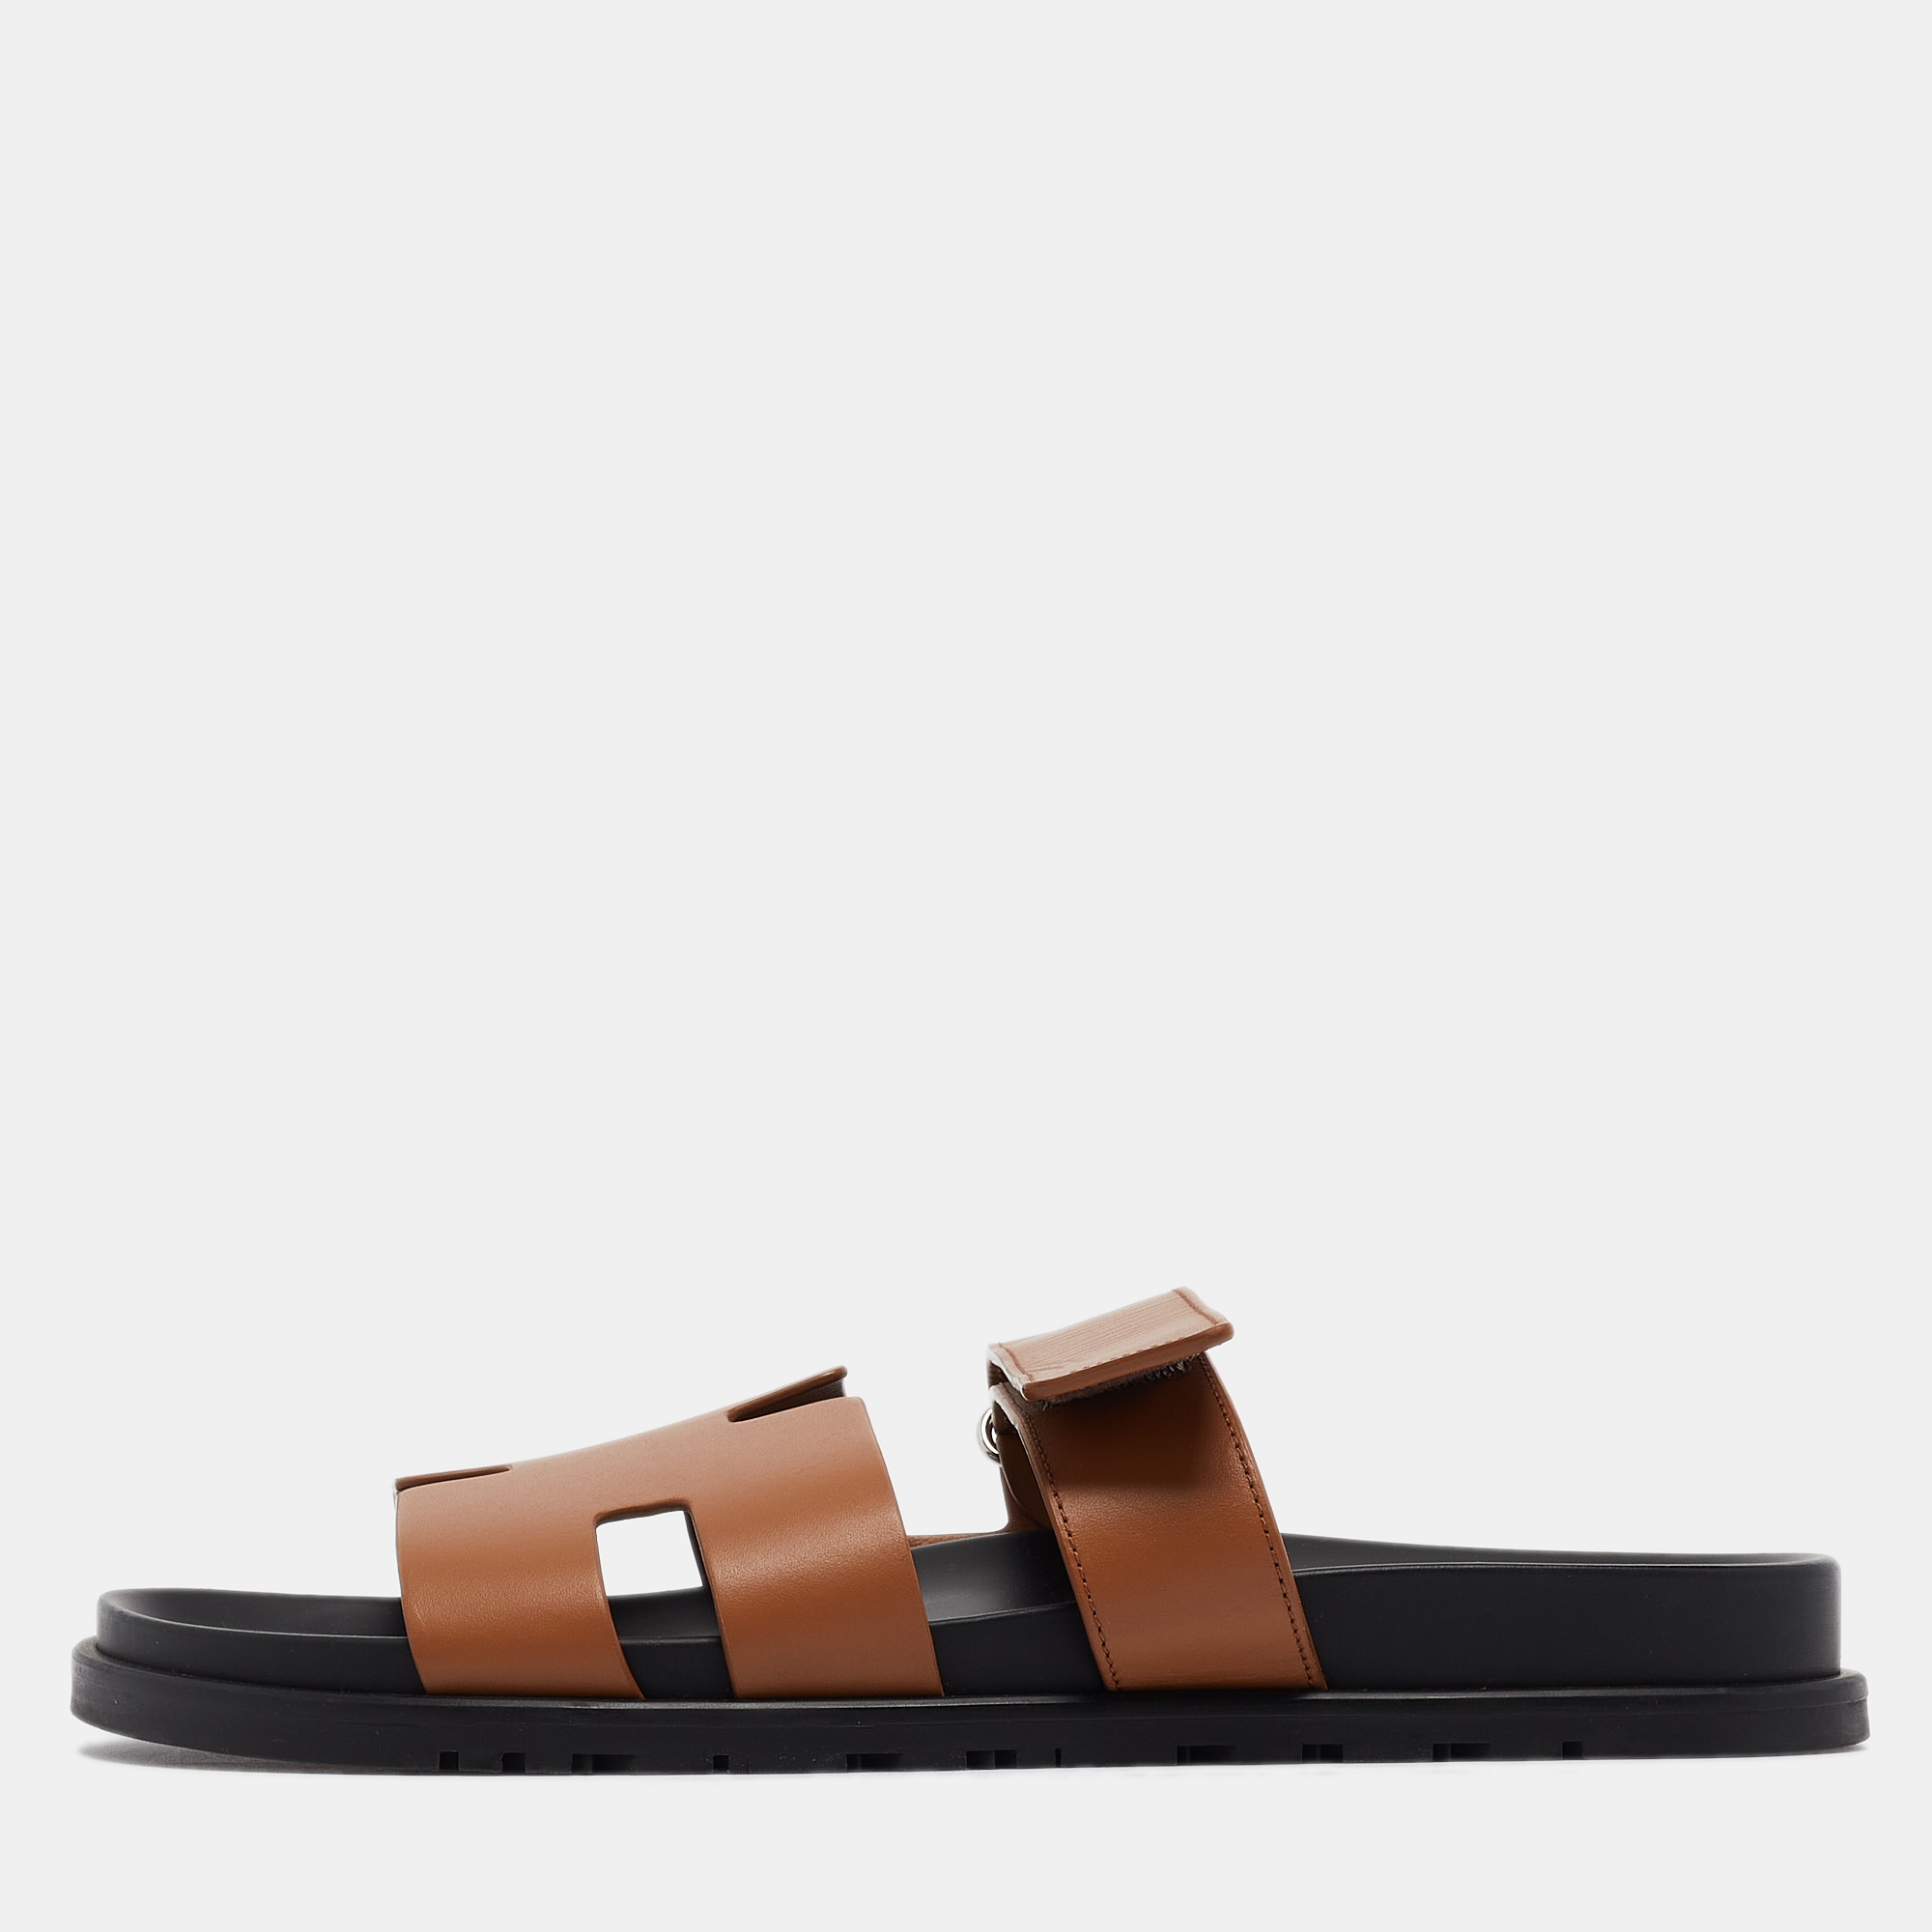 Hermes herm&egrave;s brown leather chypre sandals size 43